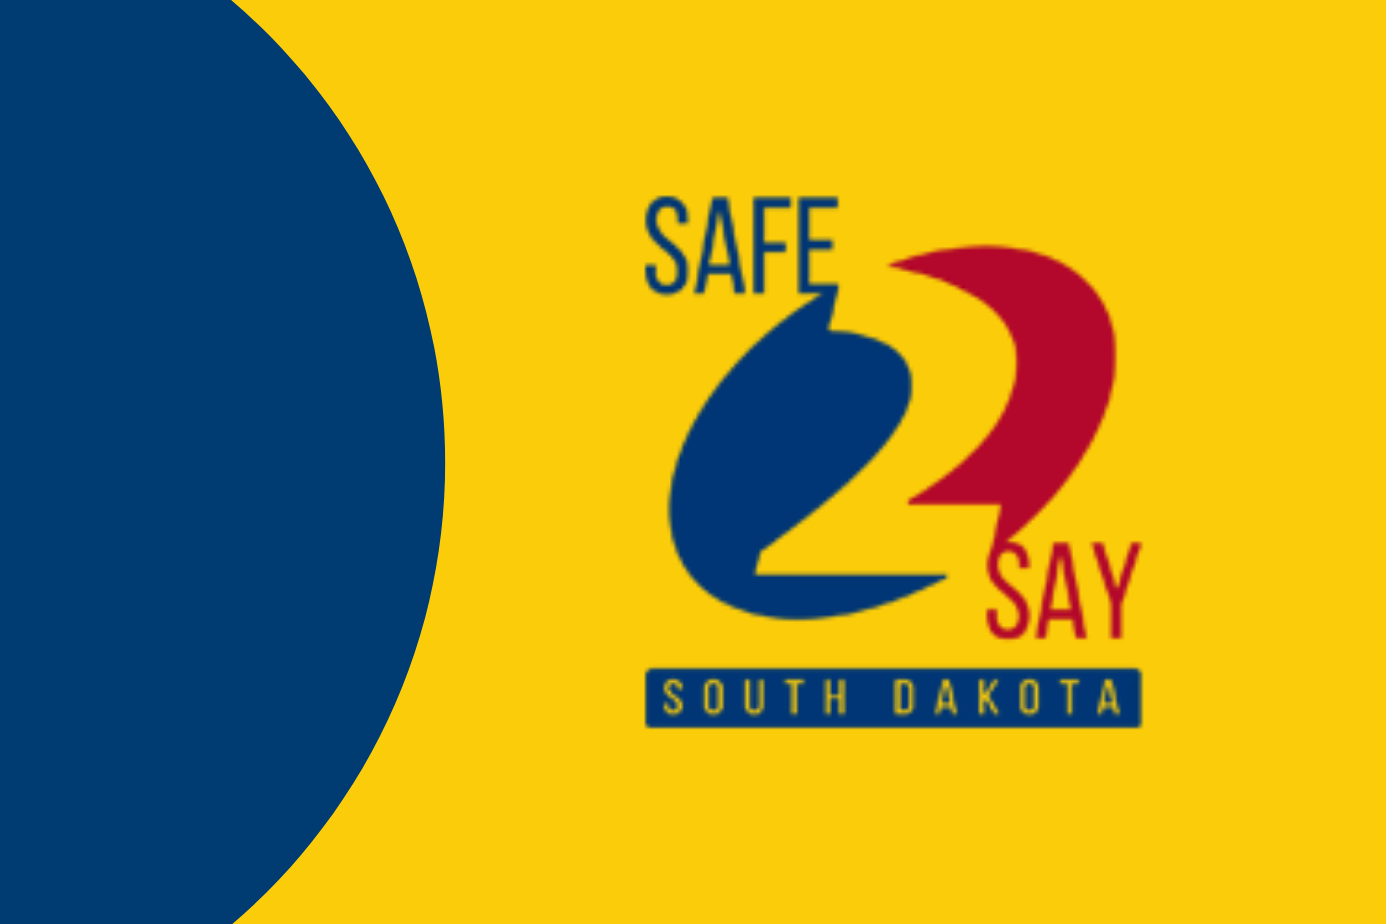 Graphic with logo for Safe 2 Say South Dakota